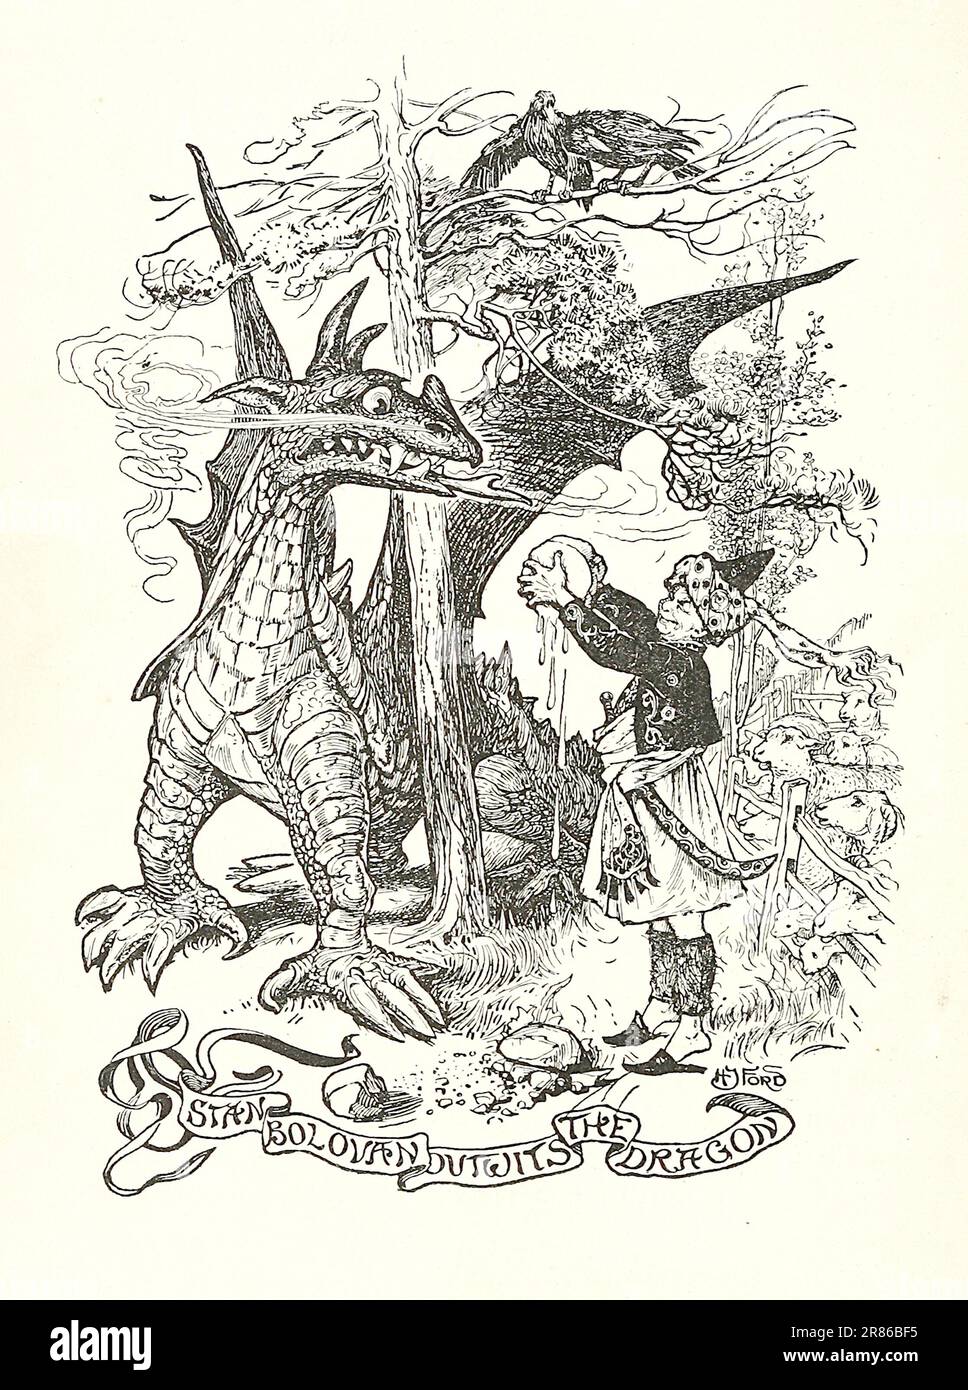 Henry Justice Ford - Stan Bolovan Outwits The Dragon - 1906 Stockfoto